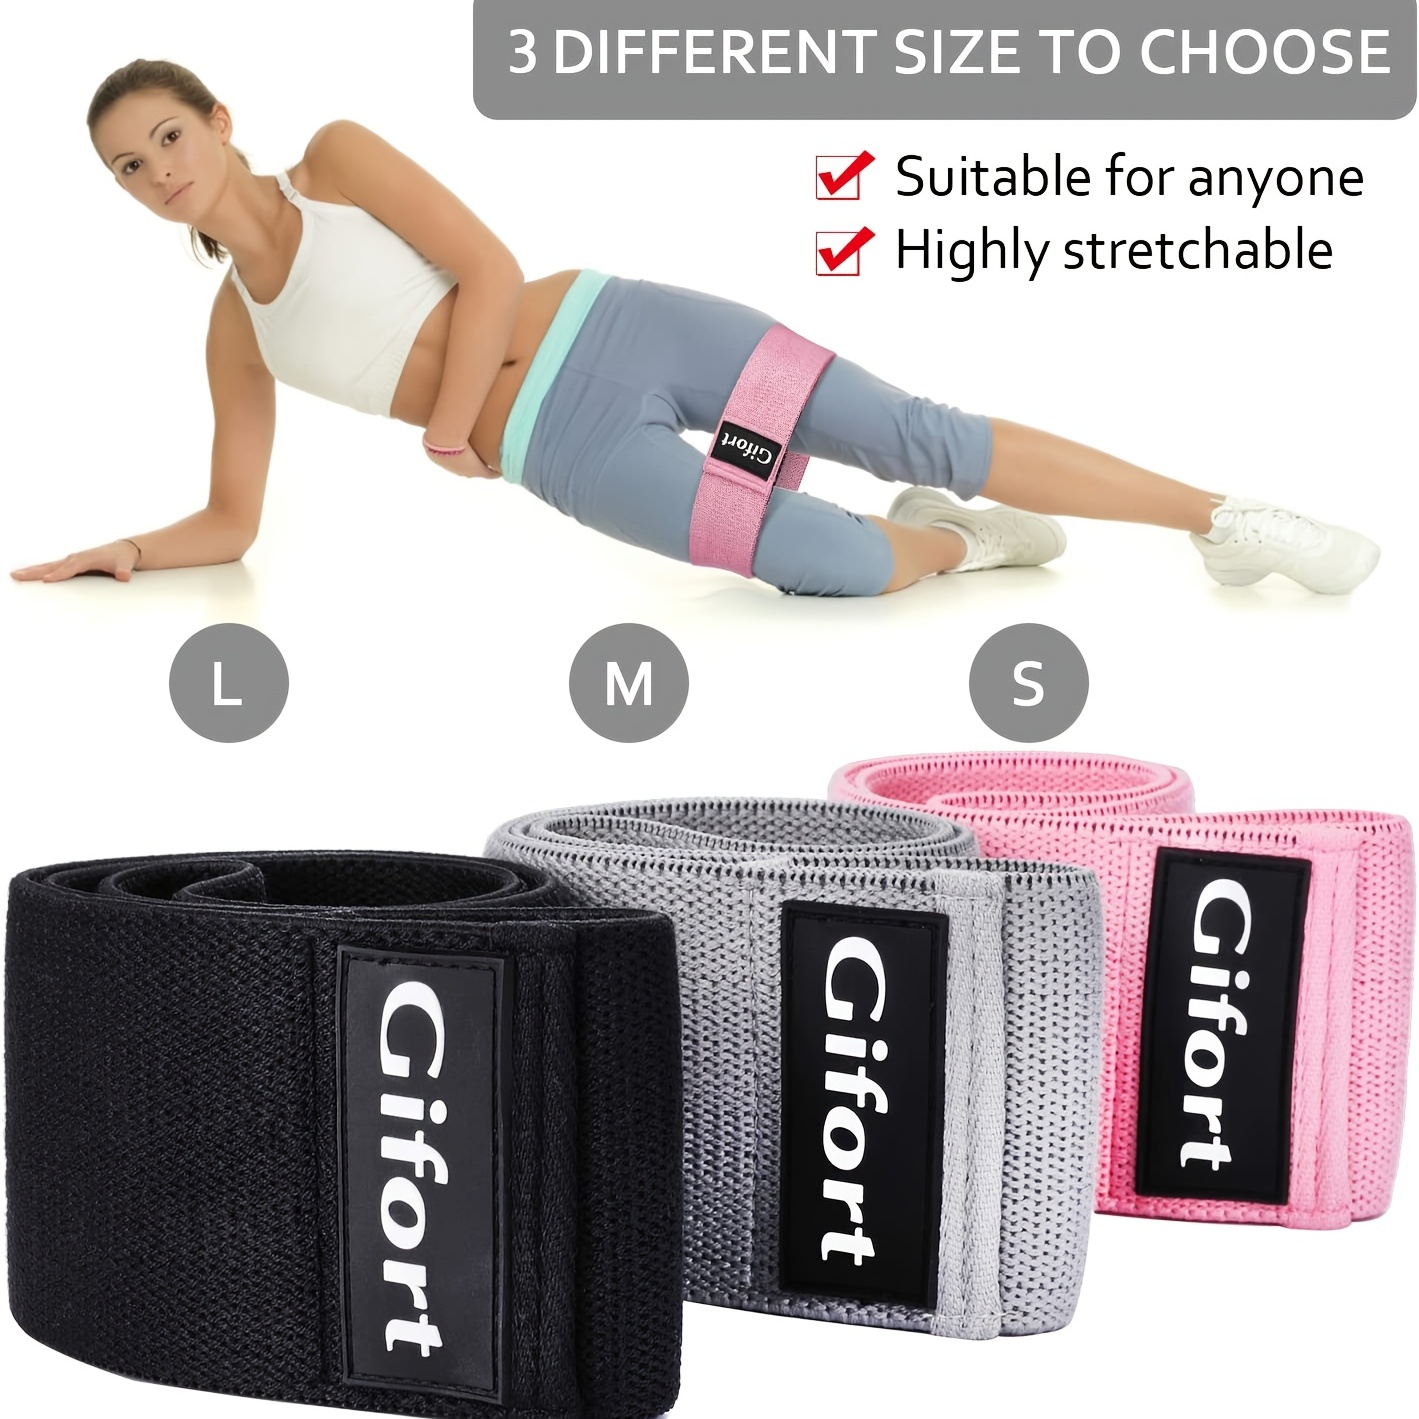 Booty Belt Resistance Exercise Band Perfect Butt Lift And Glutes Muscle  Workout.